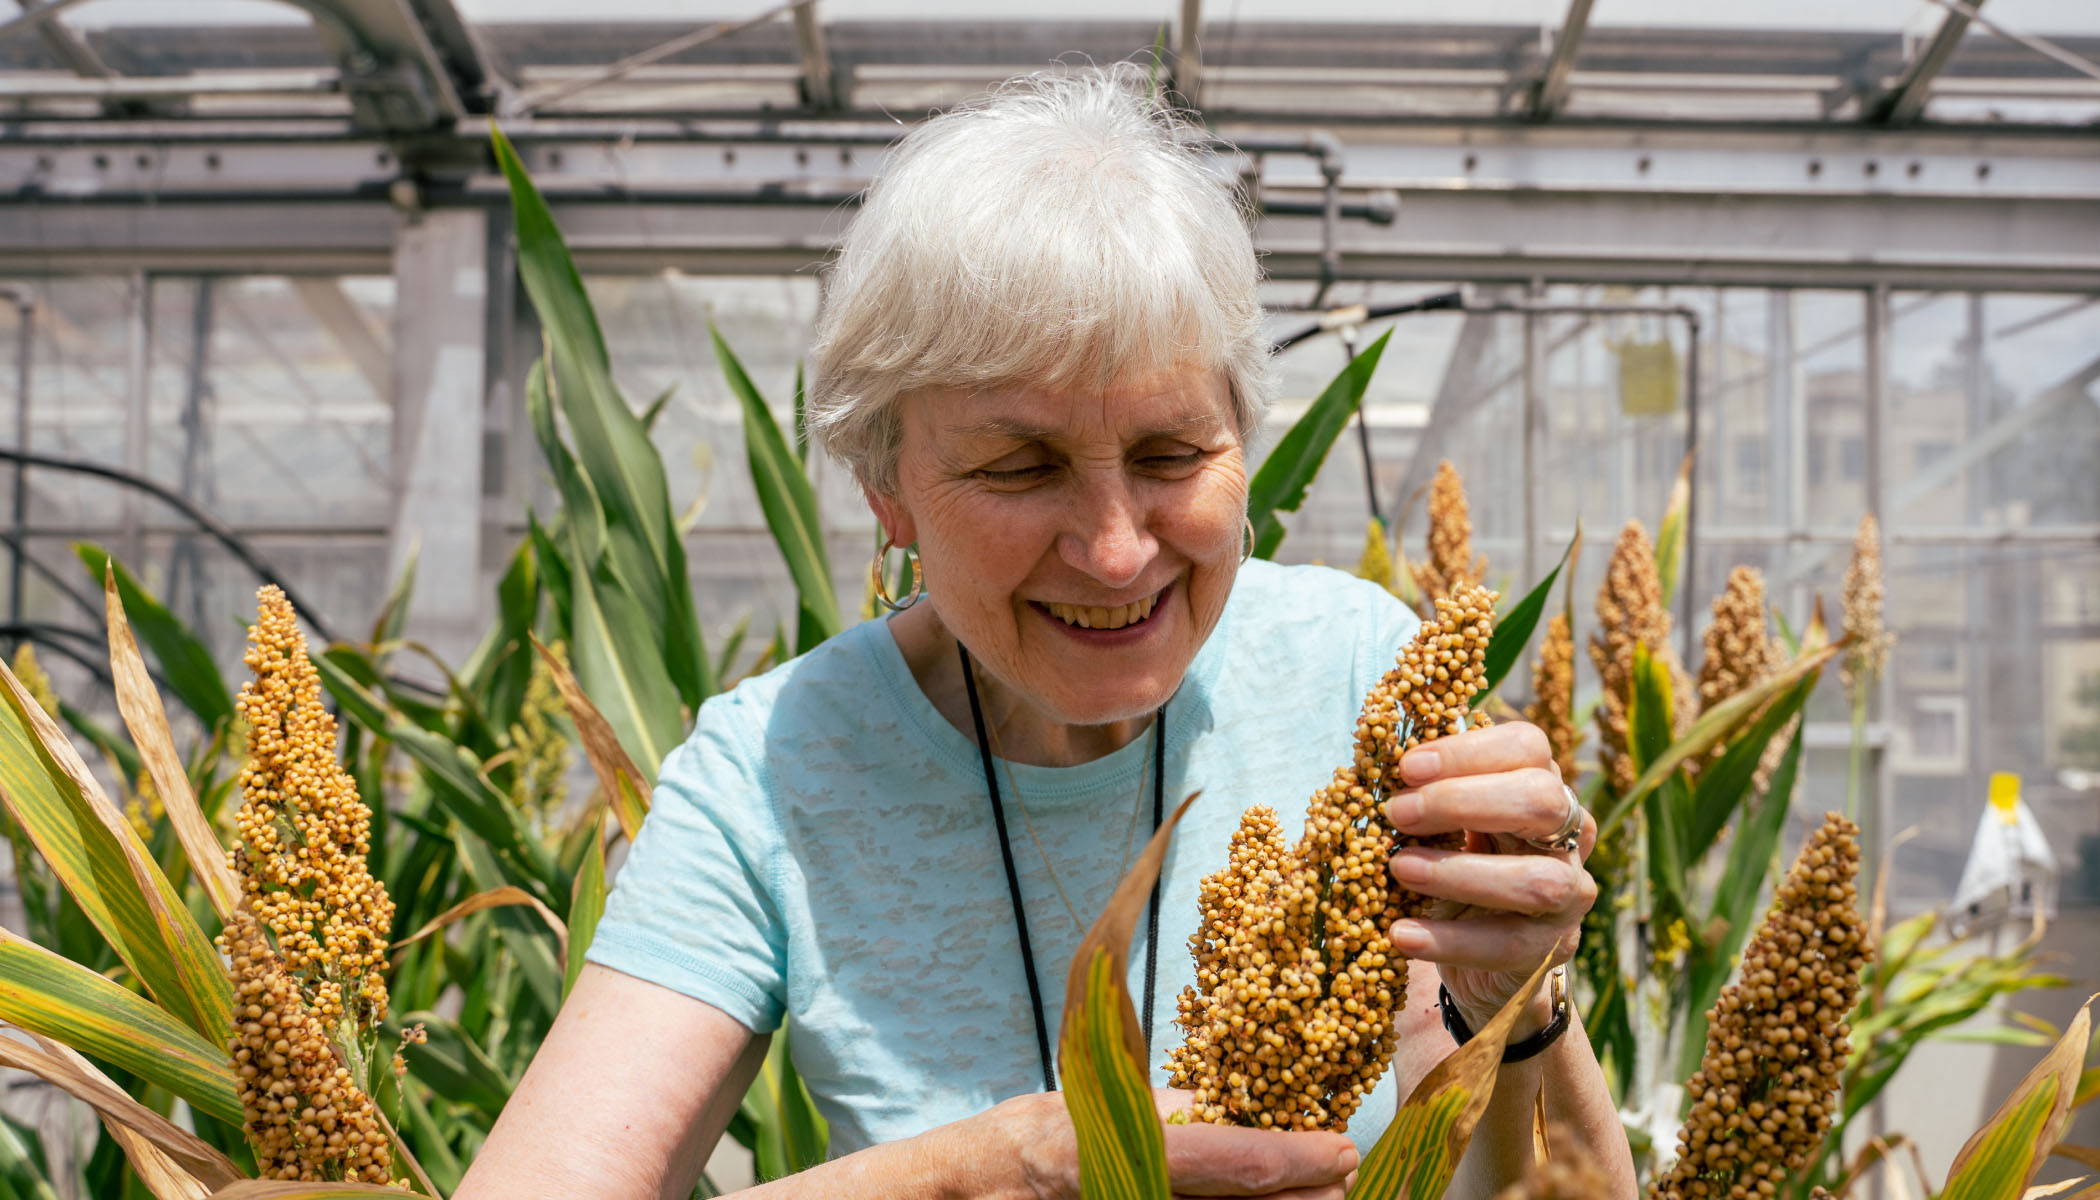 Woman smiling and observing a crop of sorghum in a greenhouse.